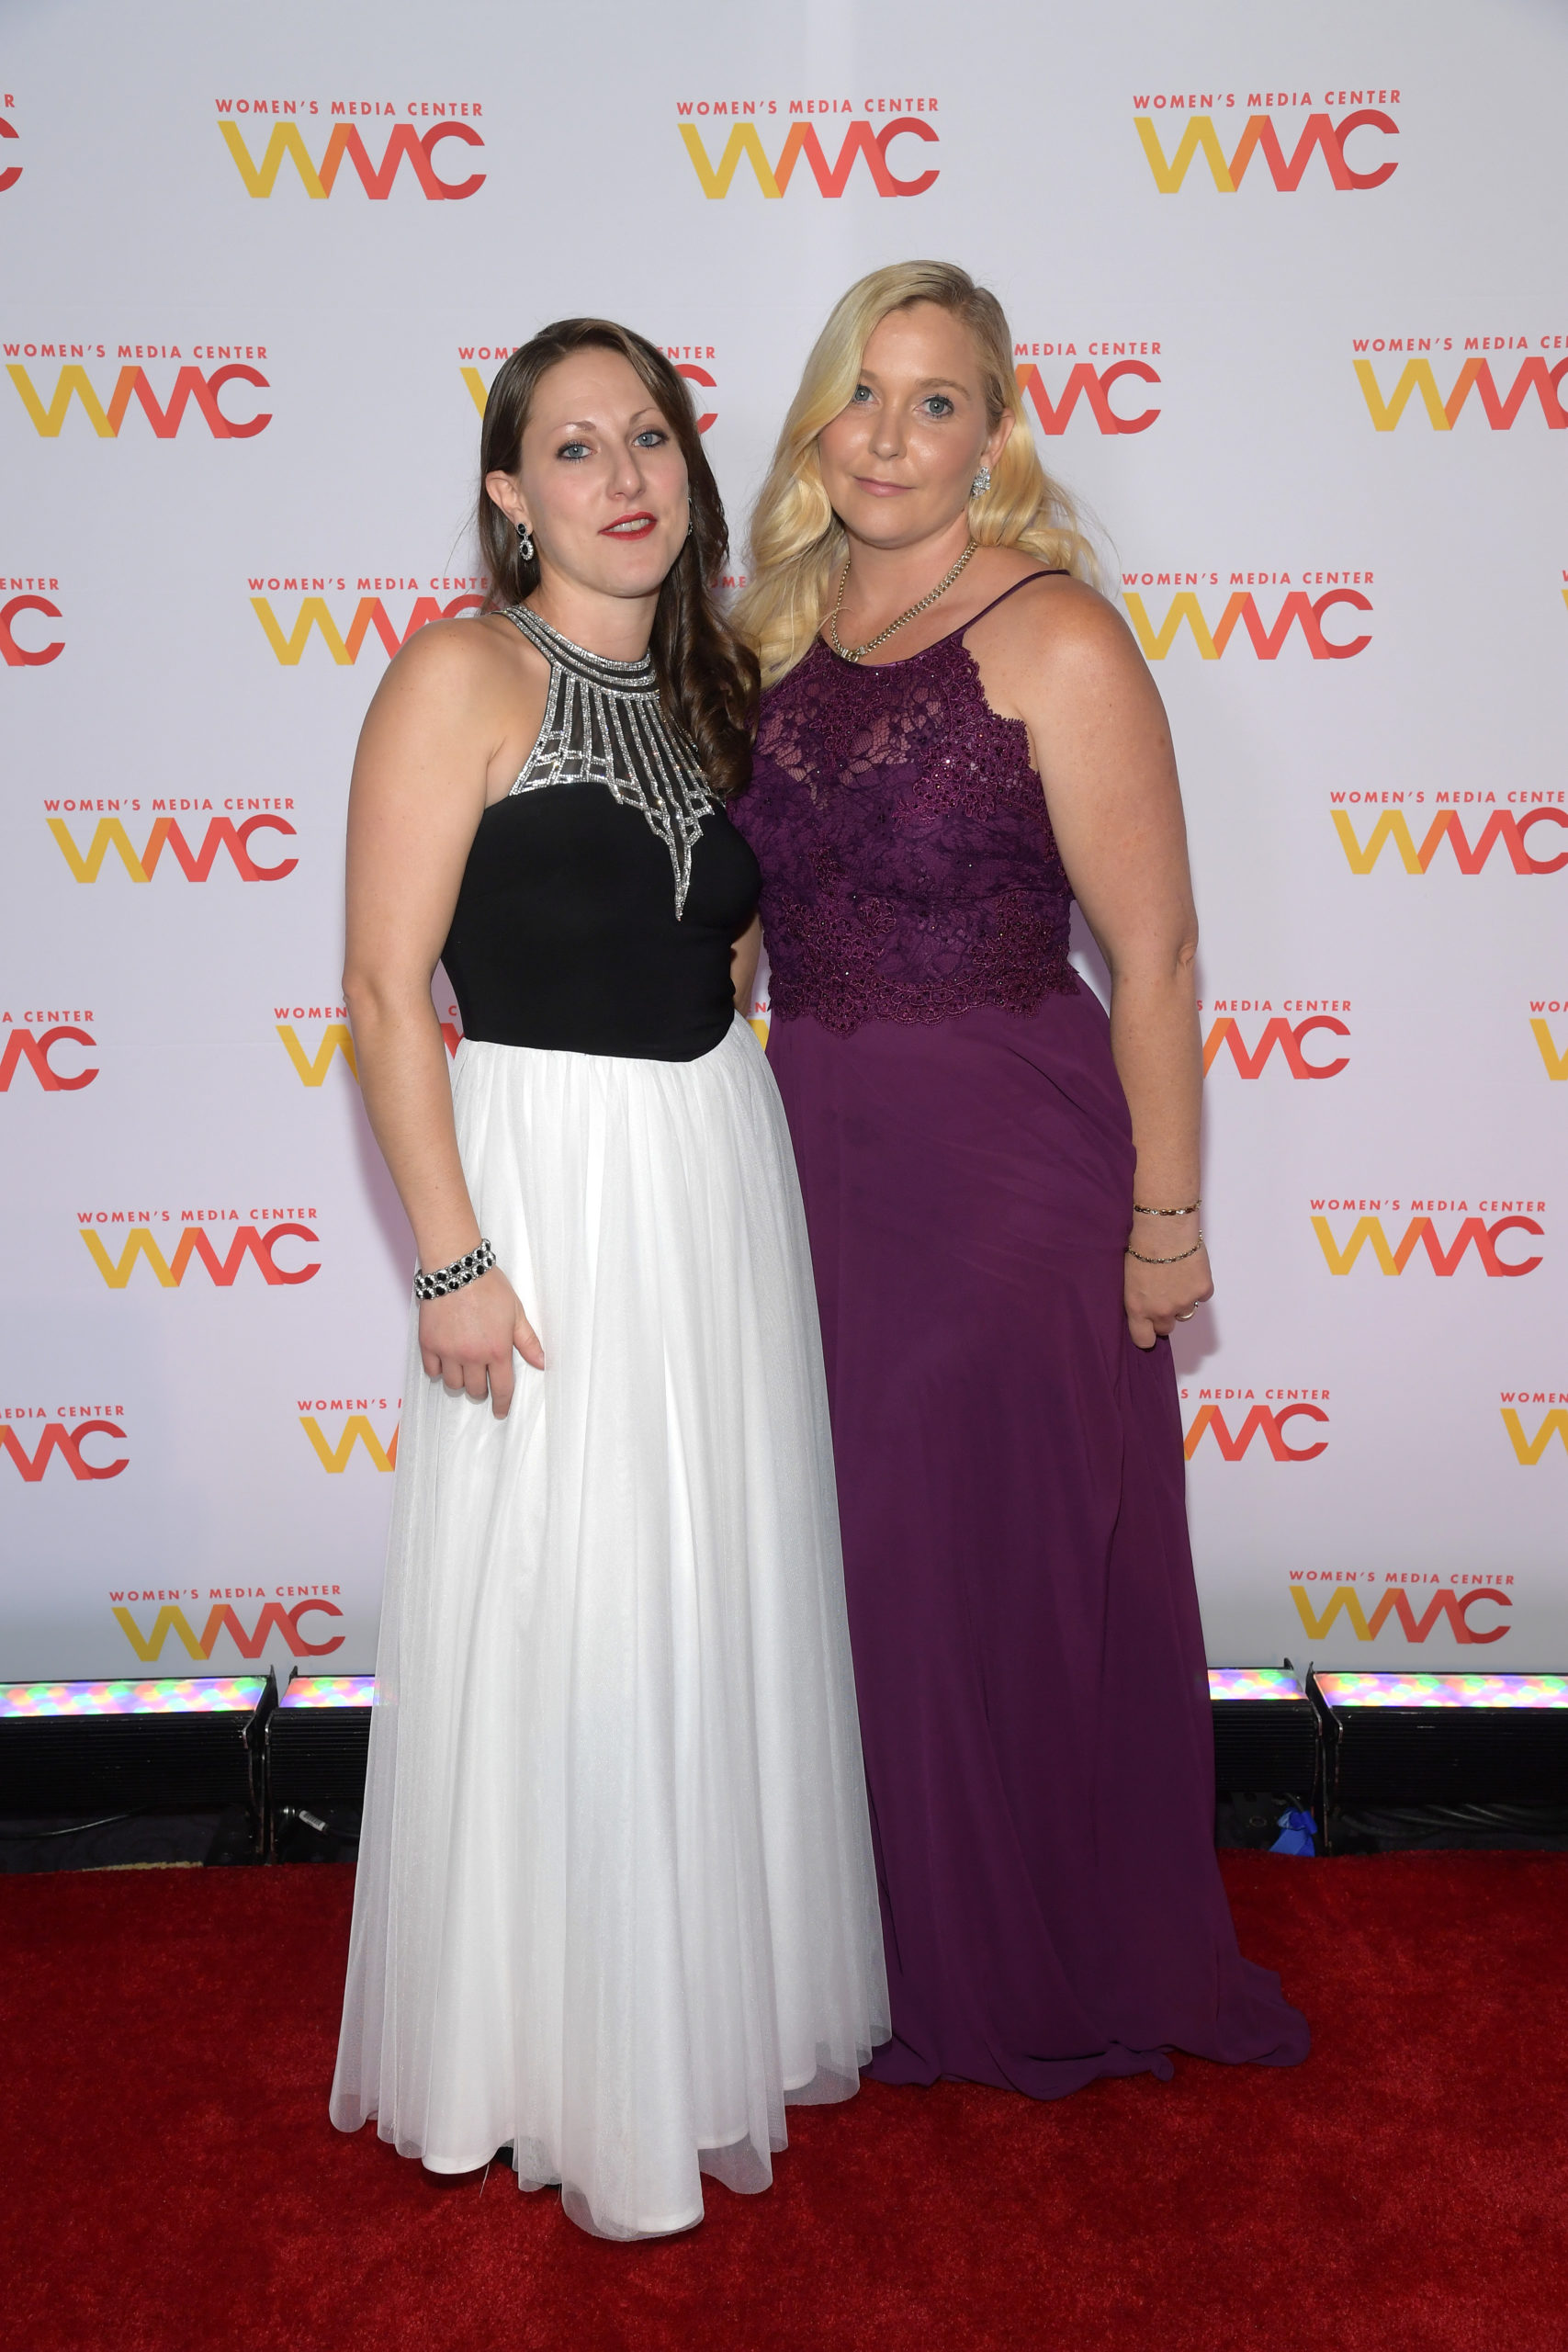 NEW YORK, NEW YORK - OCTOBER 22: (L-R) Michelle Licata and Virginia Giuffre attend the 2019 Women's Media Awards at Mandarin Oriental on October 22, 2019 in New York City. (Photo by Ben Gabbe/Getty Images for Women's Media Award)